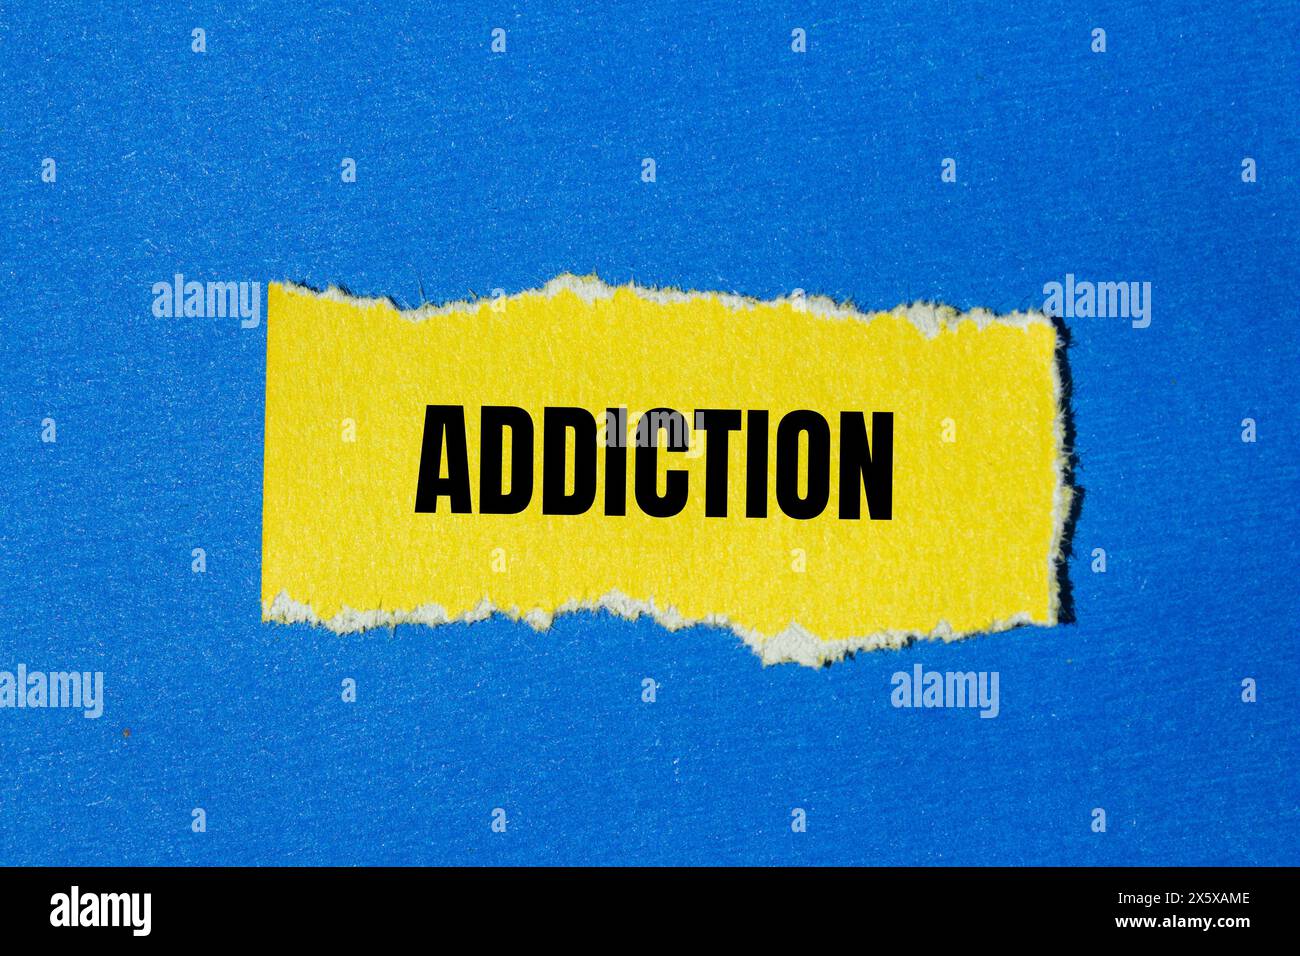 Addiction word written on ripped yellow paper with blue background. Conceptual addiction symbol. Copy space. Stock Photo